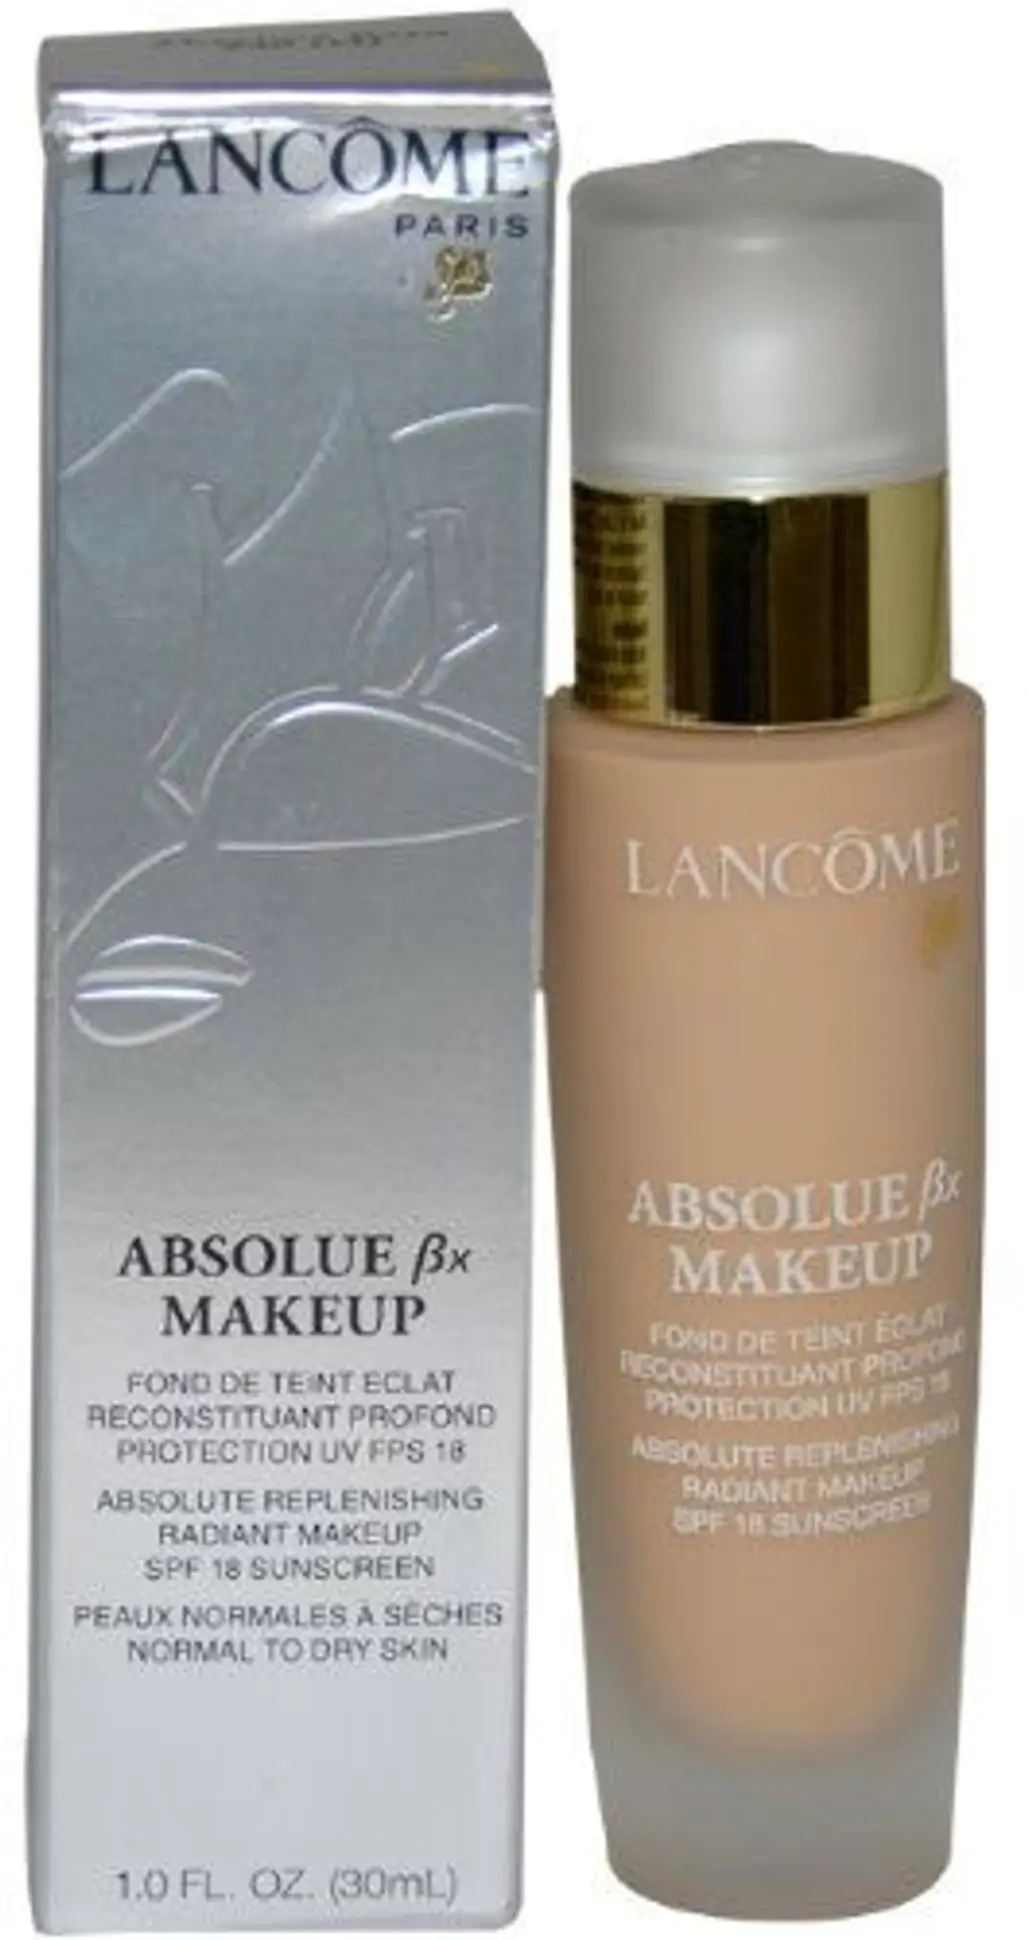 Absolue BX Absolute Replenishing Radiant Makeup SPF 18